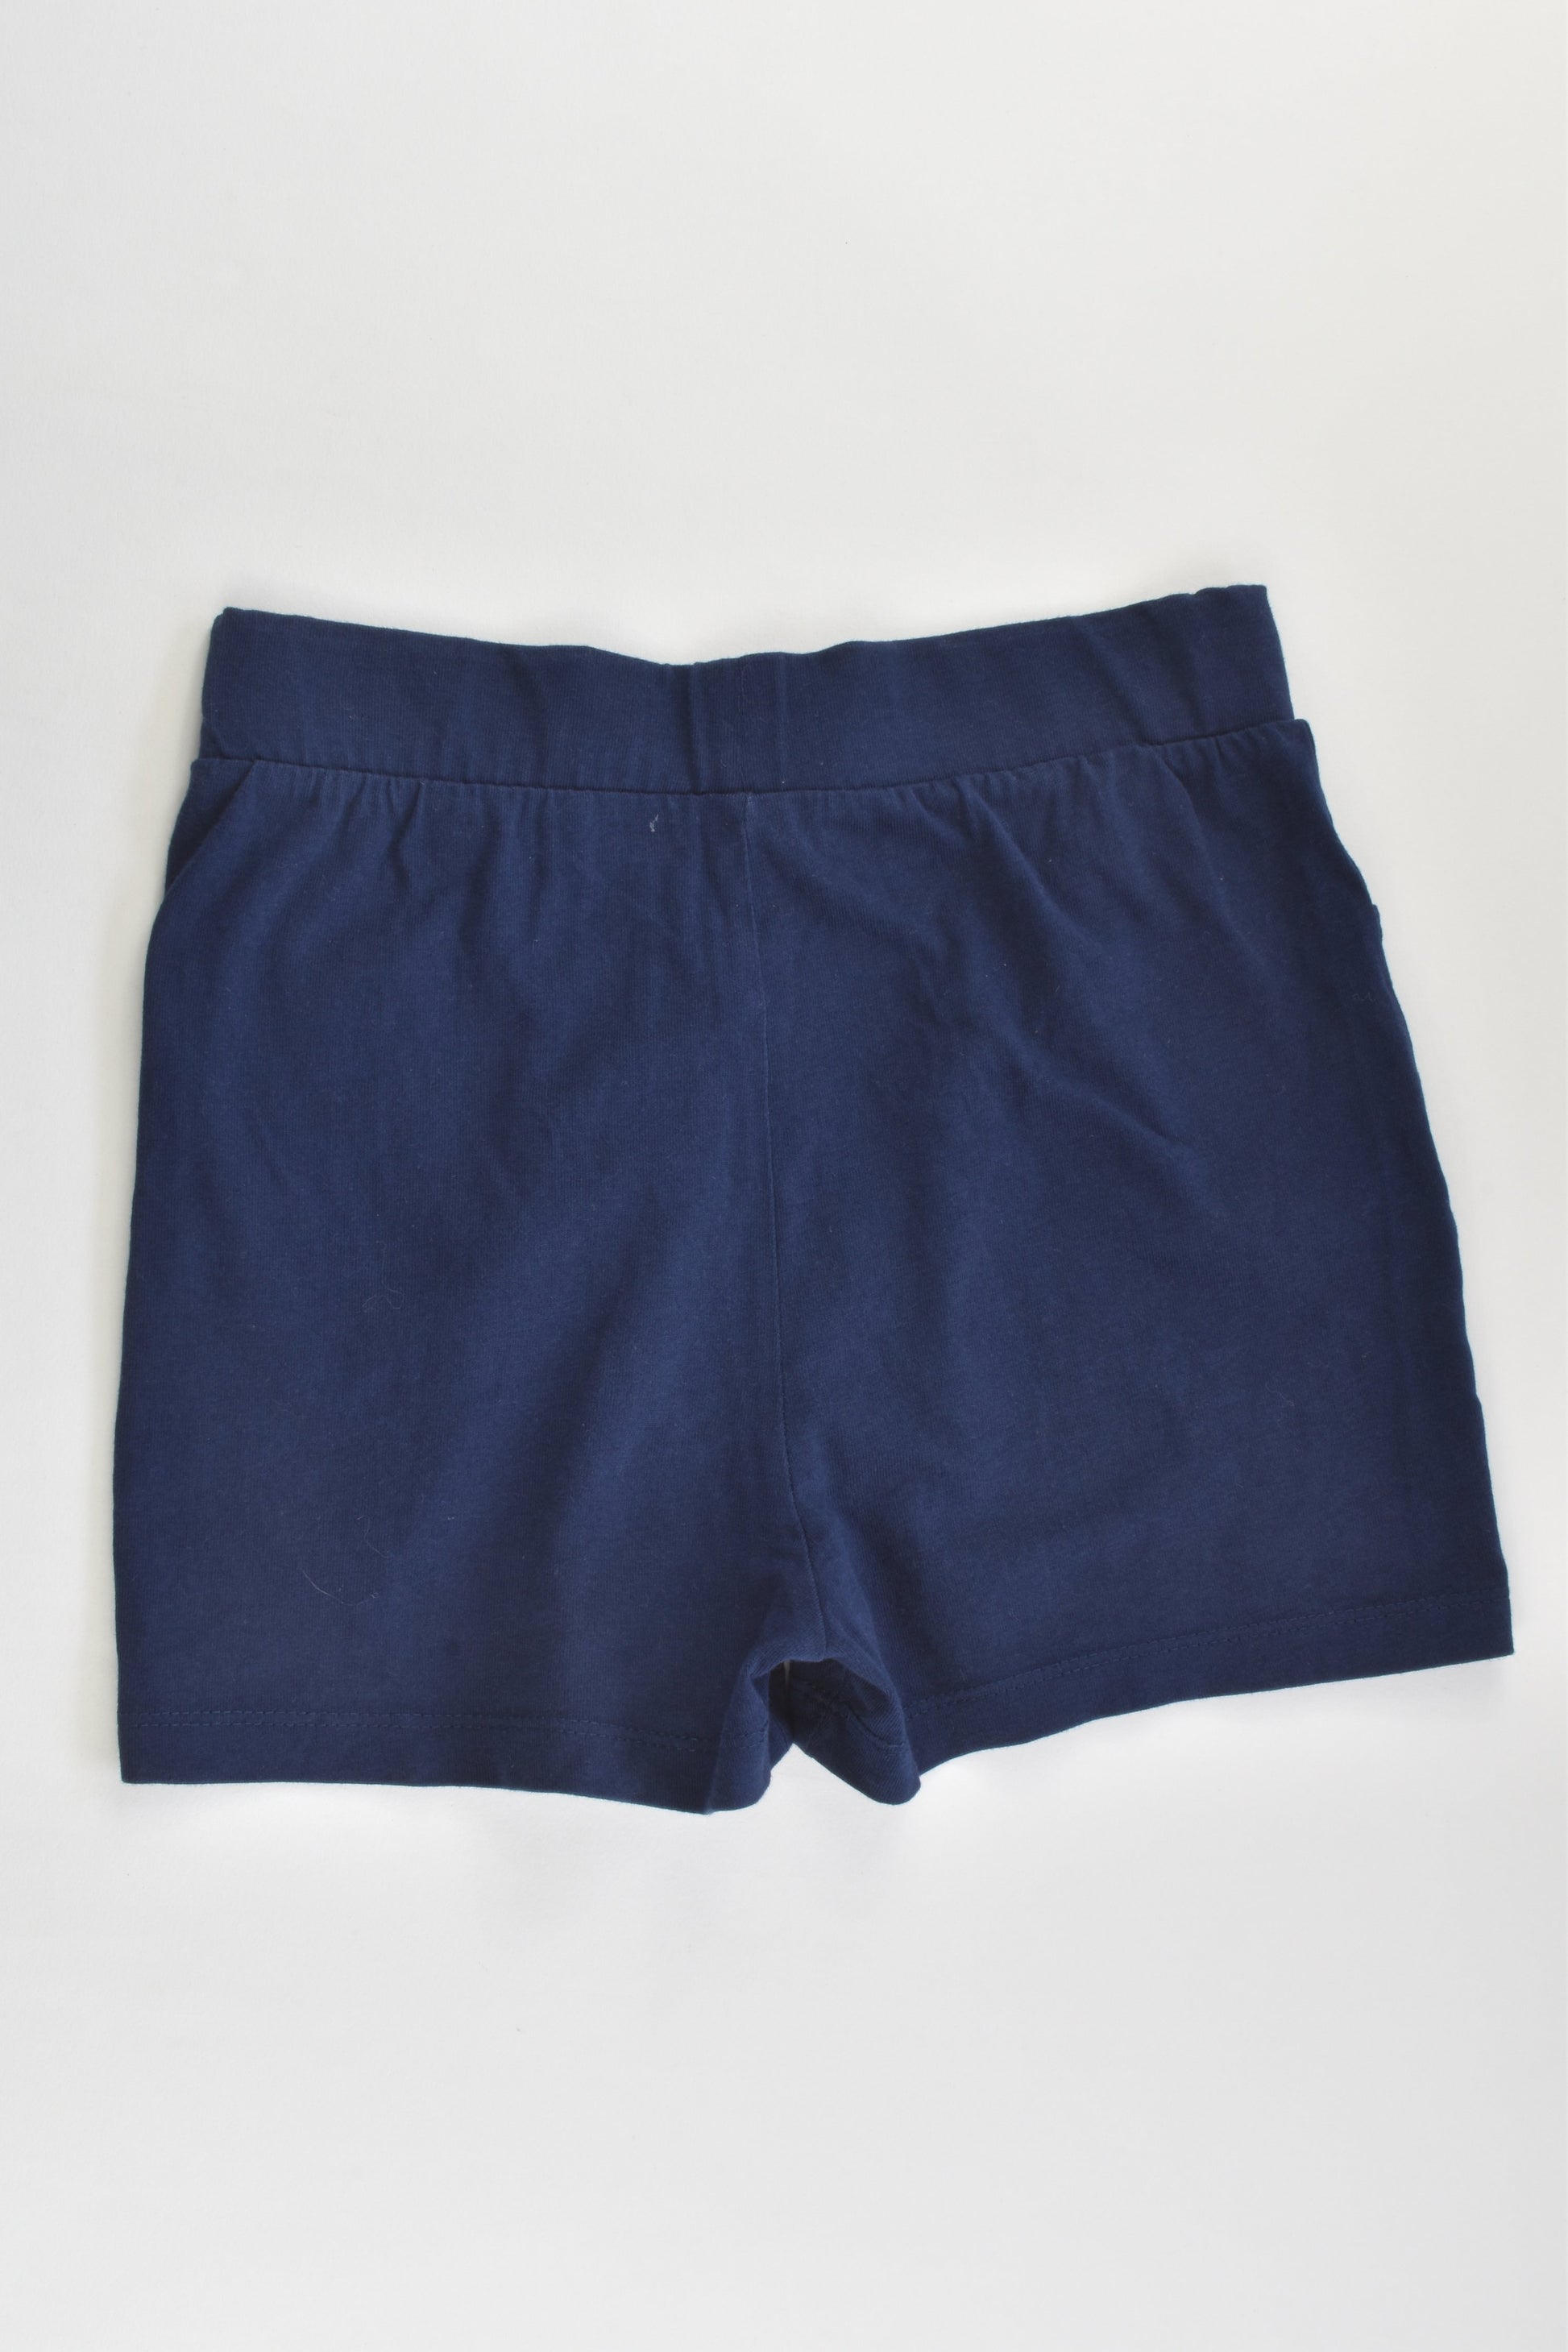 H&T Size 7 Shorts